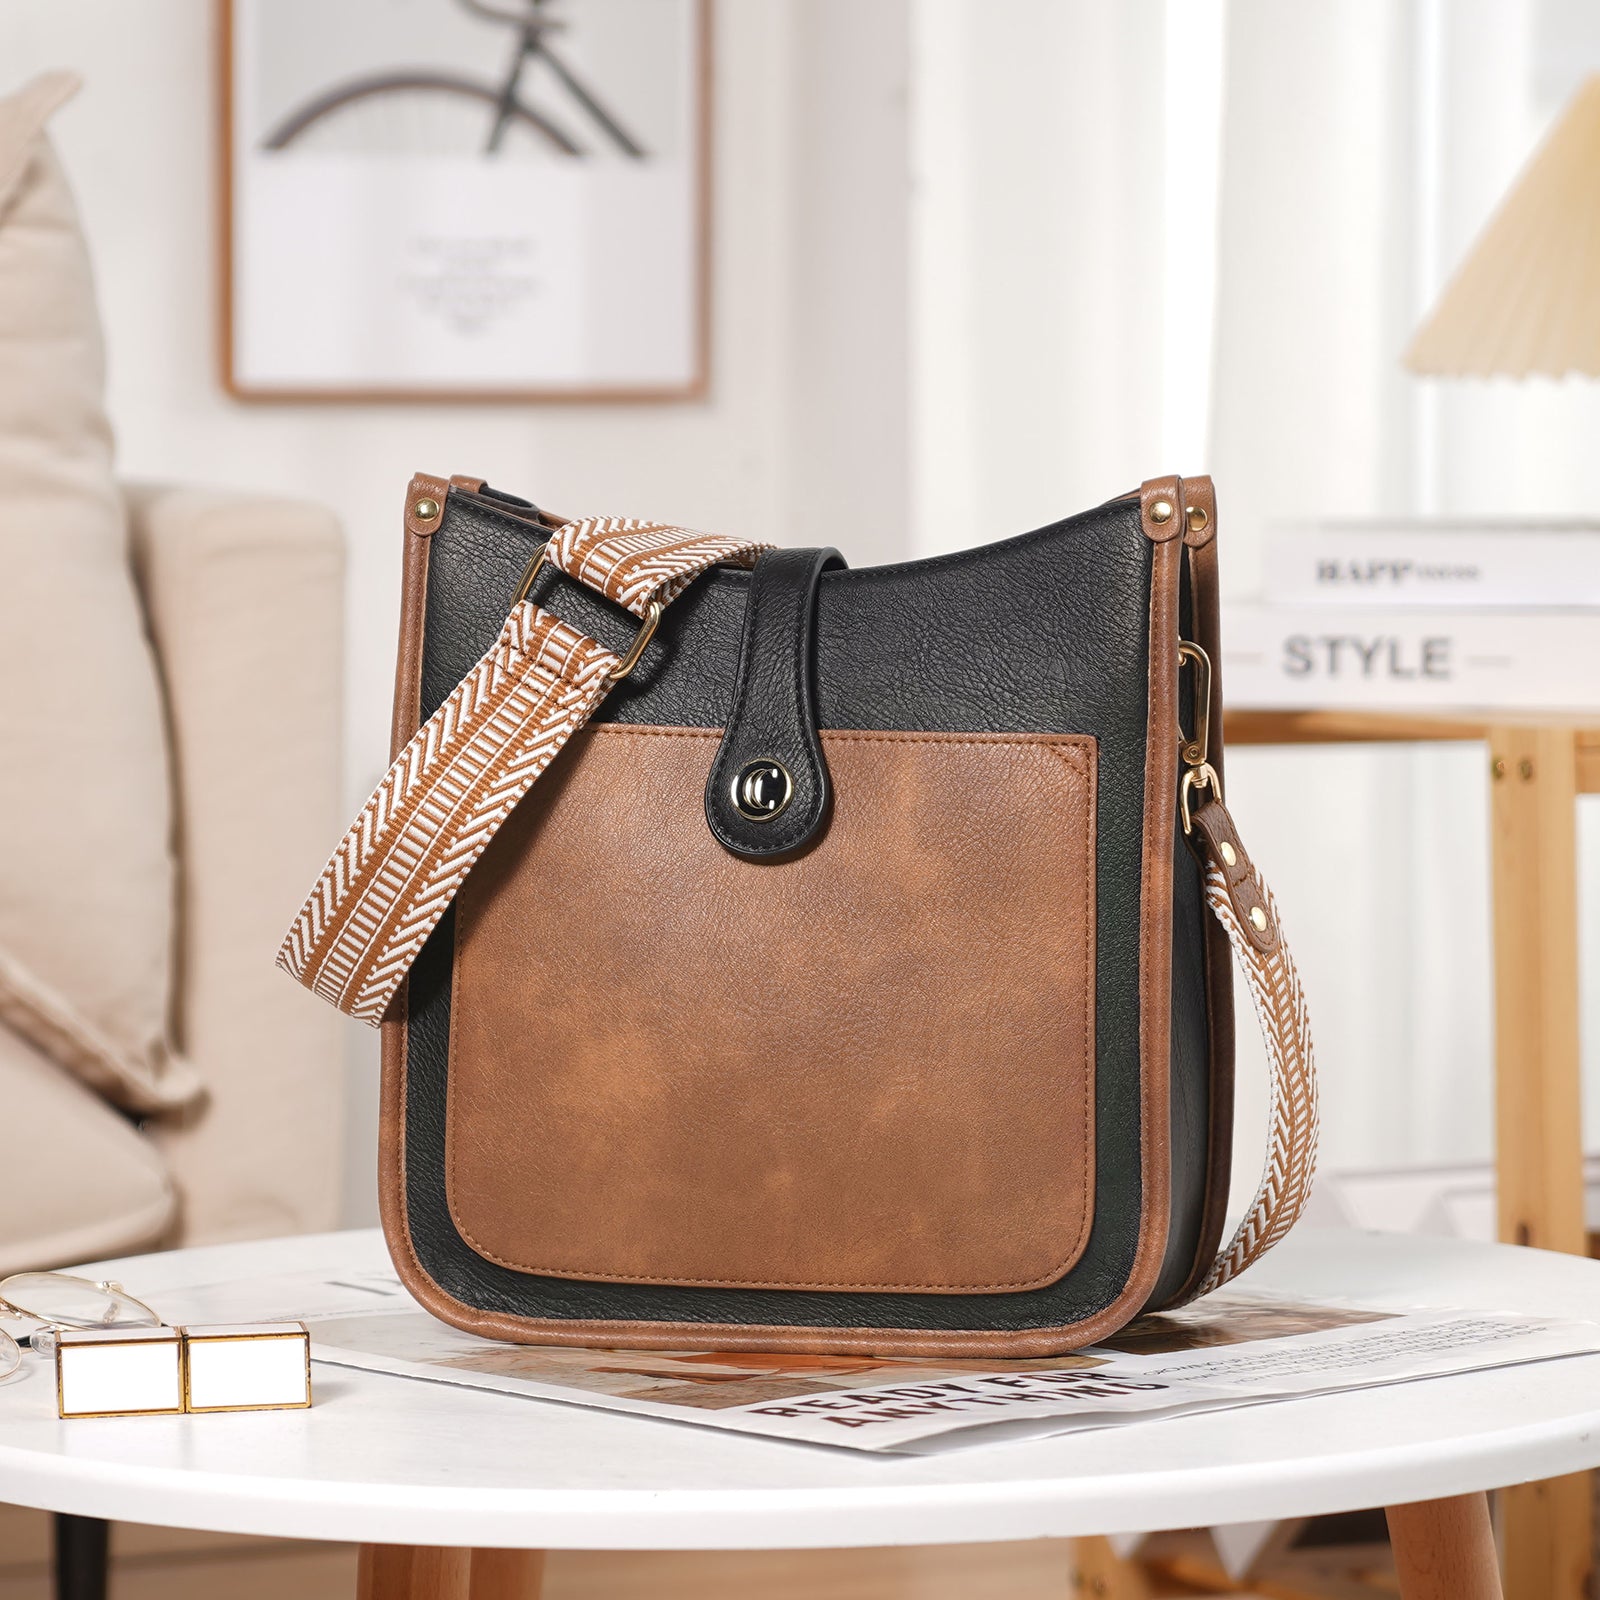 Crossbody Bags For Women Trendy Shoulder Bag Vegan Leather Purse with Two Straps